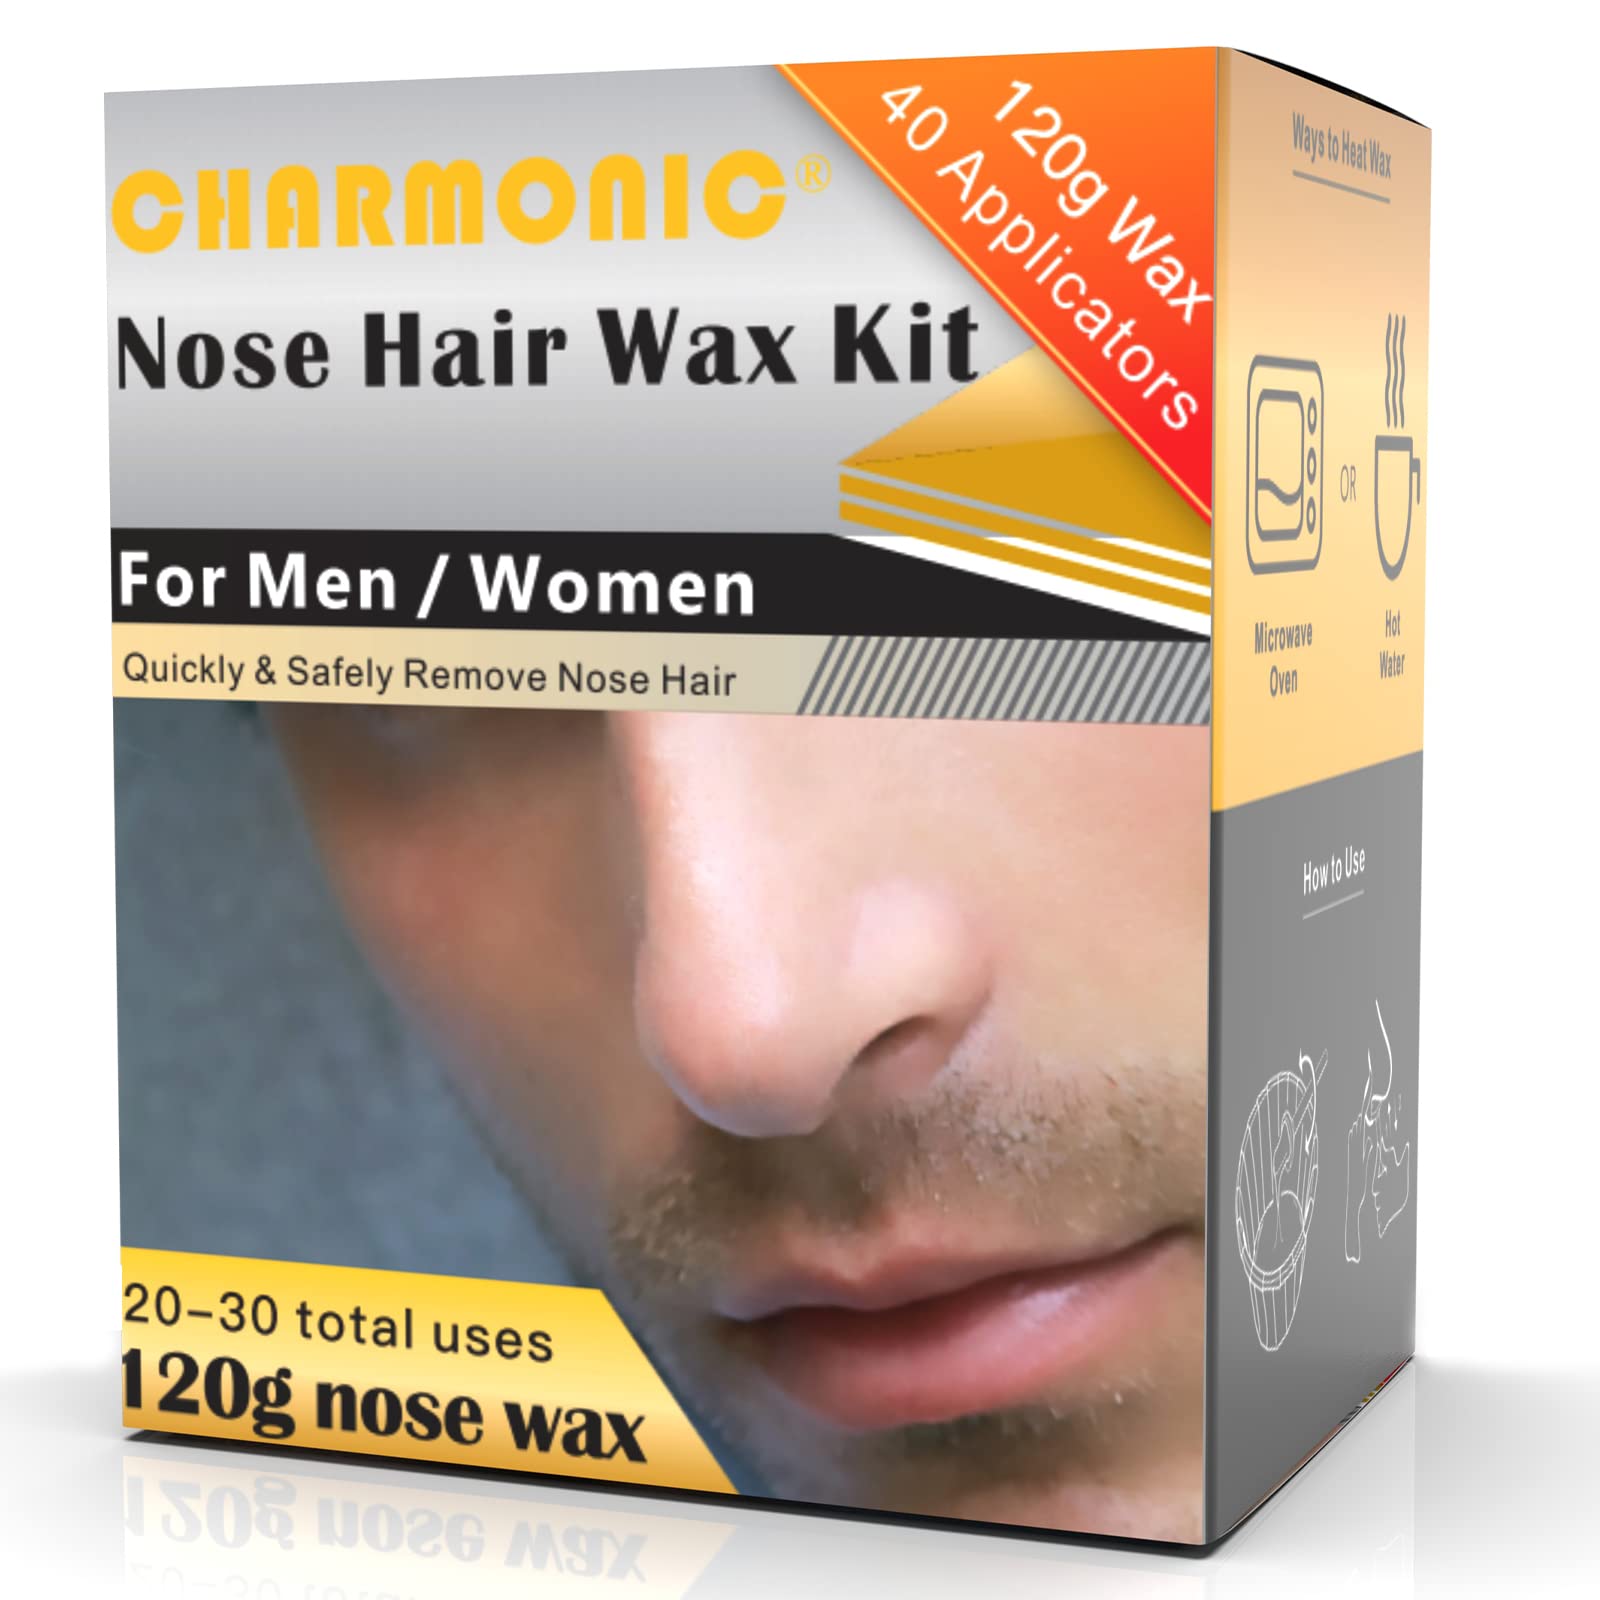 120g Wax Nose Wax Kit, Nose Hair Wax, Nose Wax with 40 Applicators, Quick &  Painless Nose Hair Waxing Kit for Men and Women, Nose Hair Remover Wax Kits  Used at Least